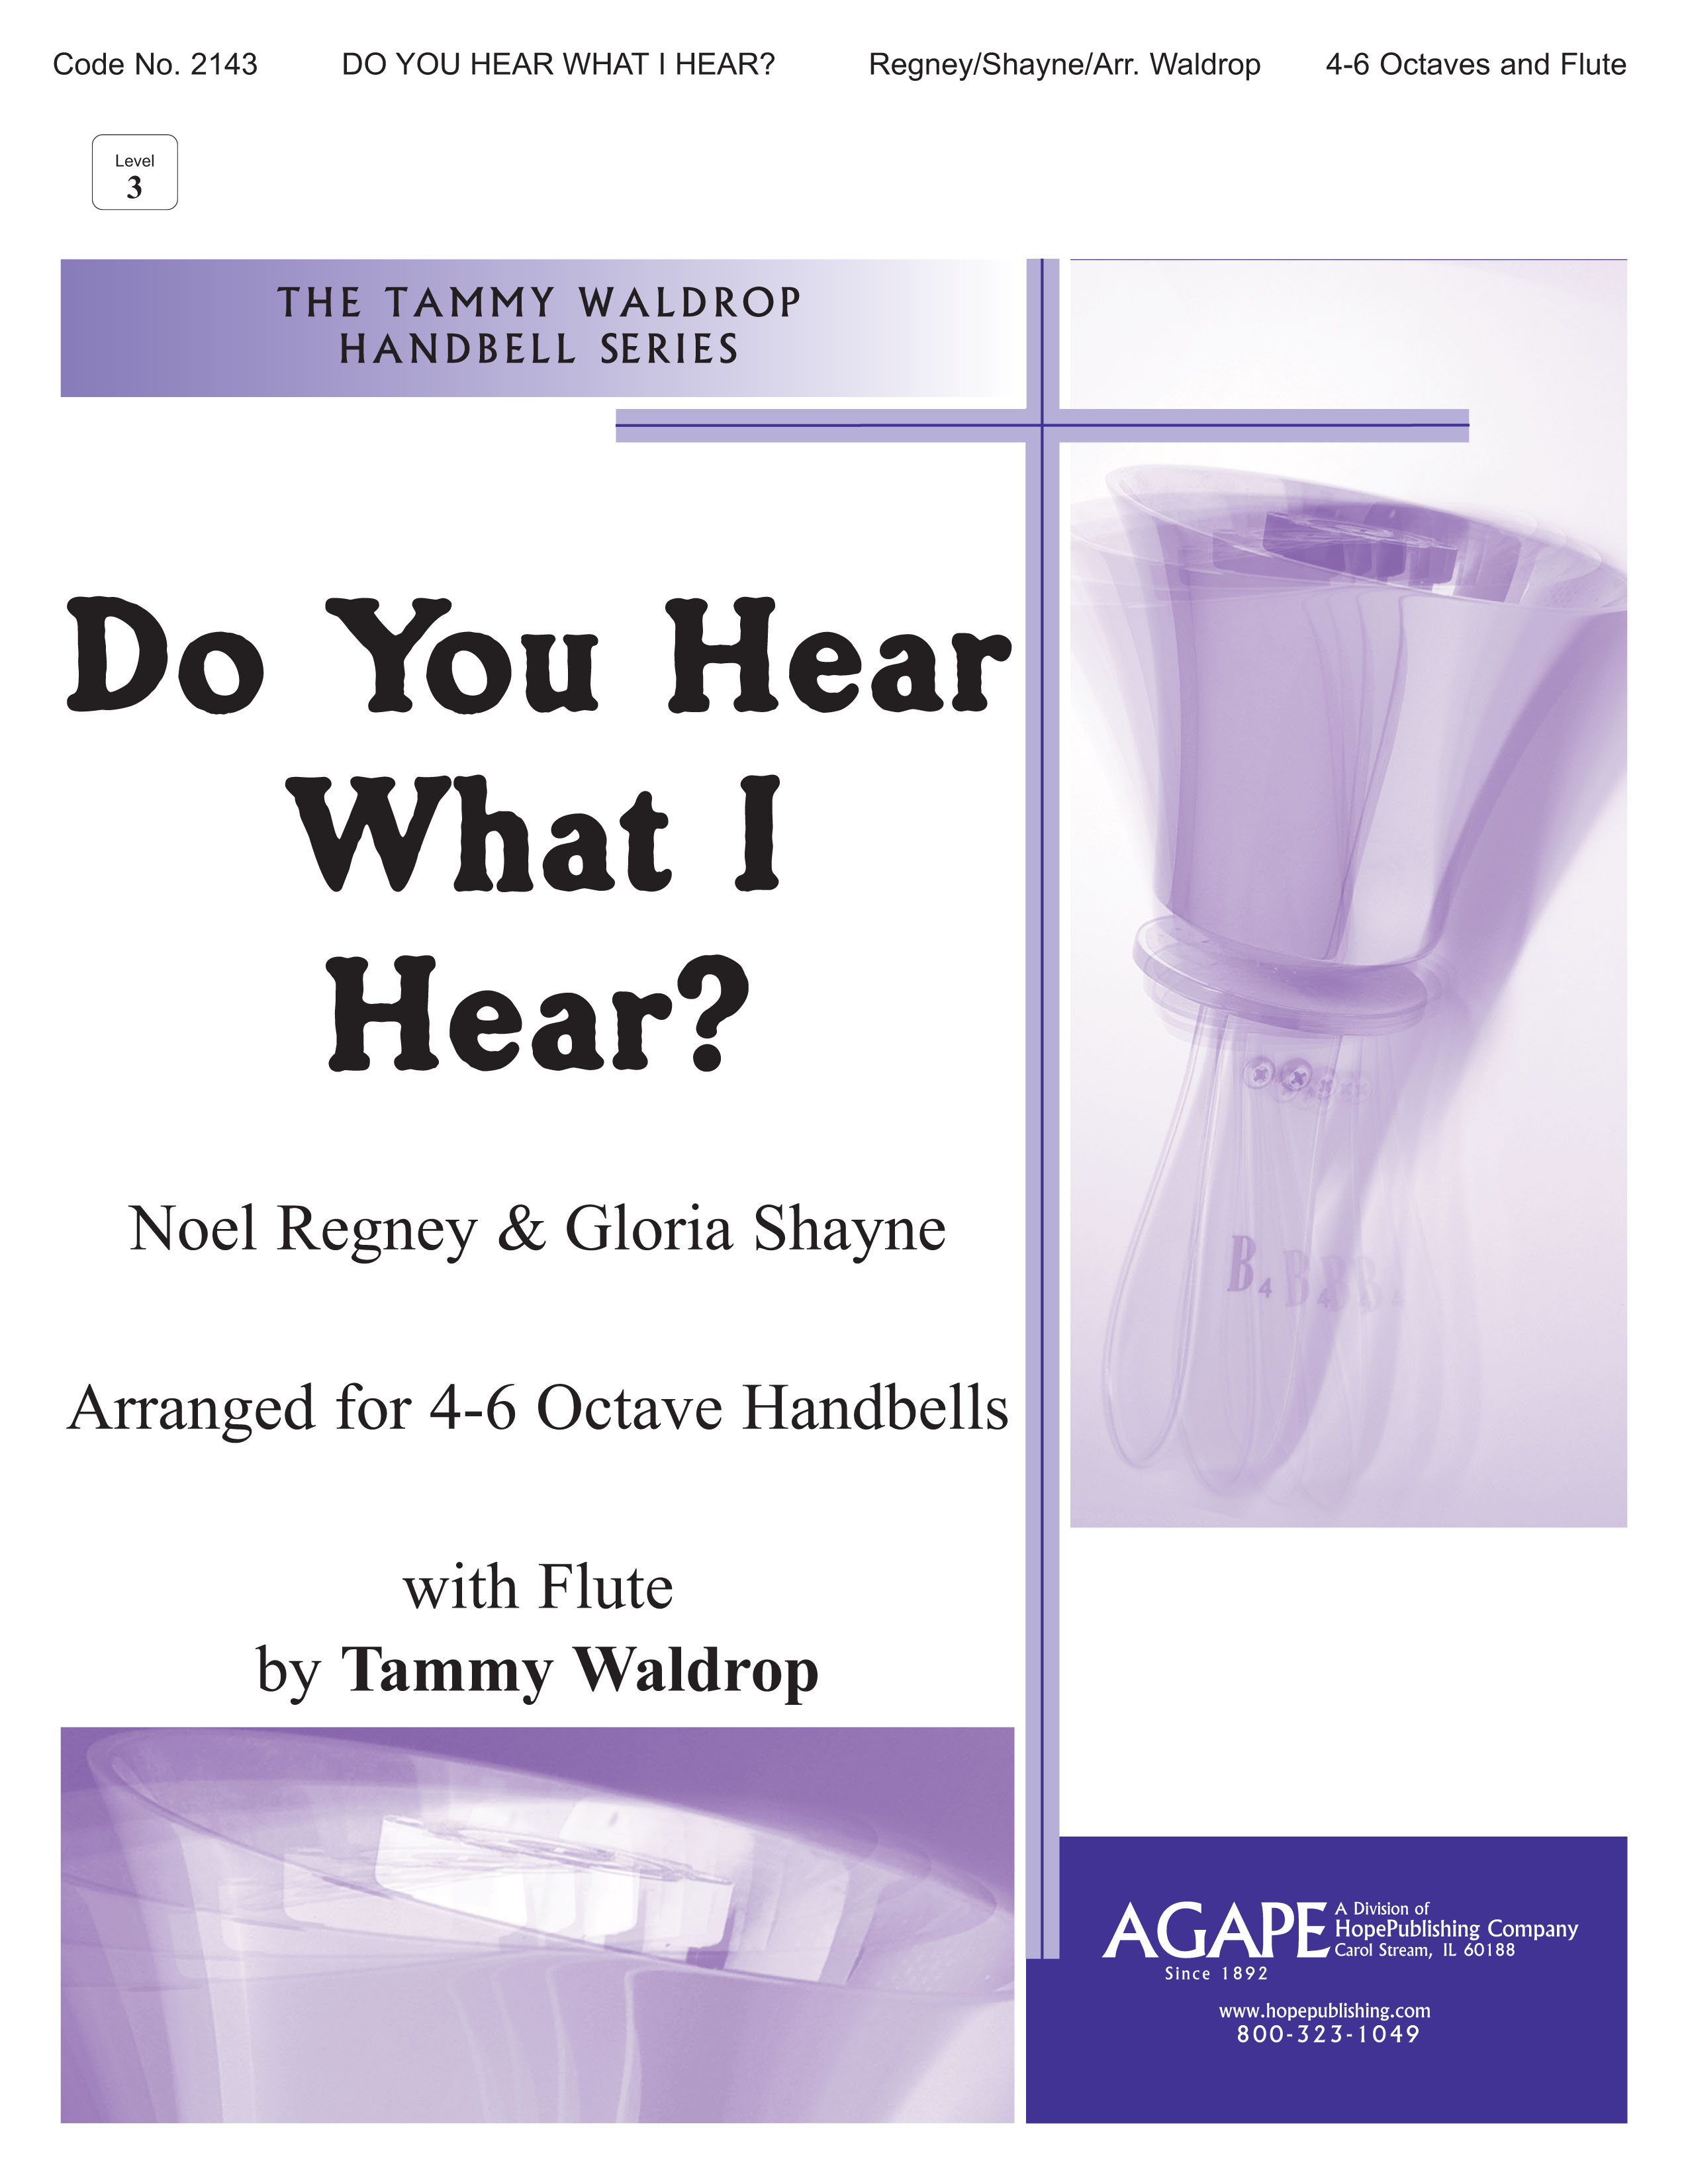 Do You Hear What I Hear - 4-6 Octave Cover Image